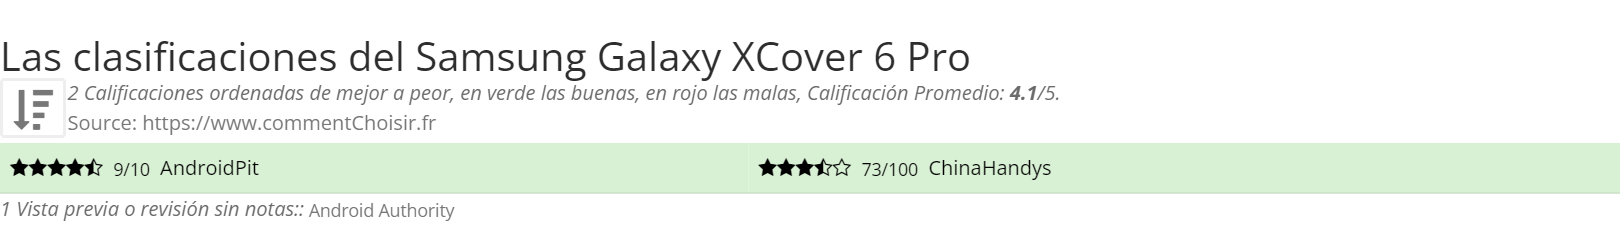 Ratings Samsung Galaxy XCover 6 Pro